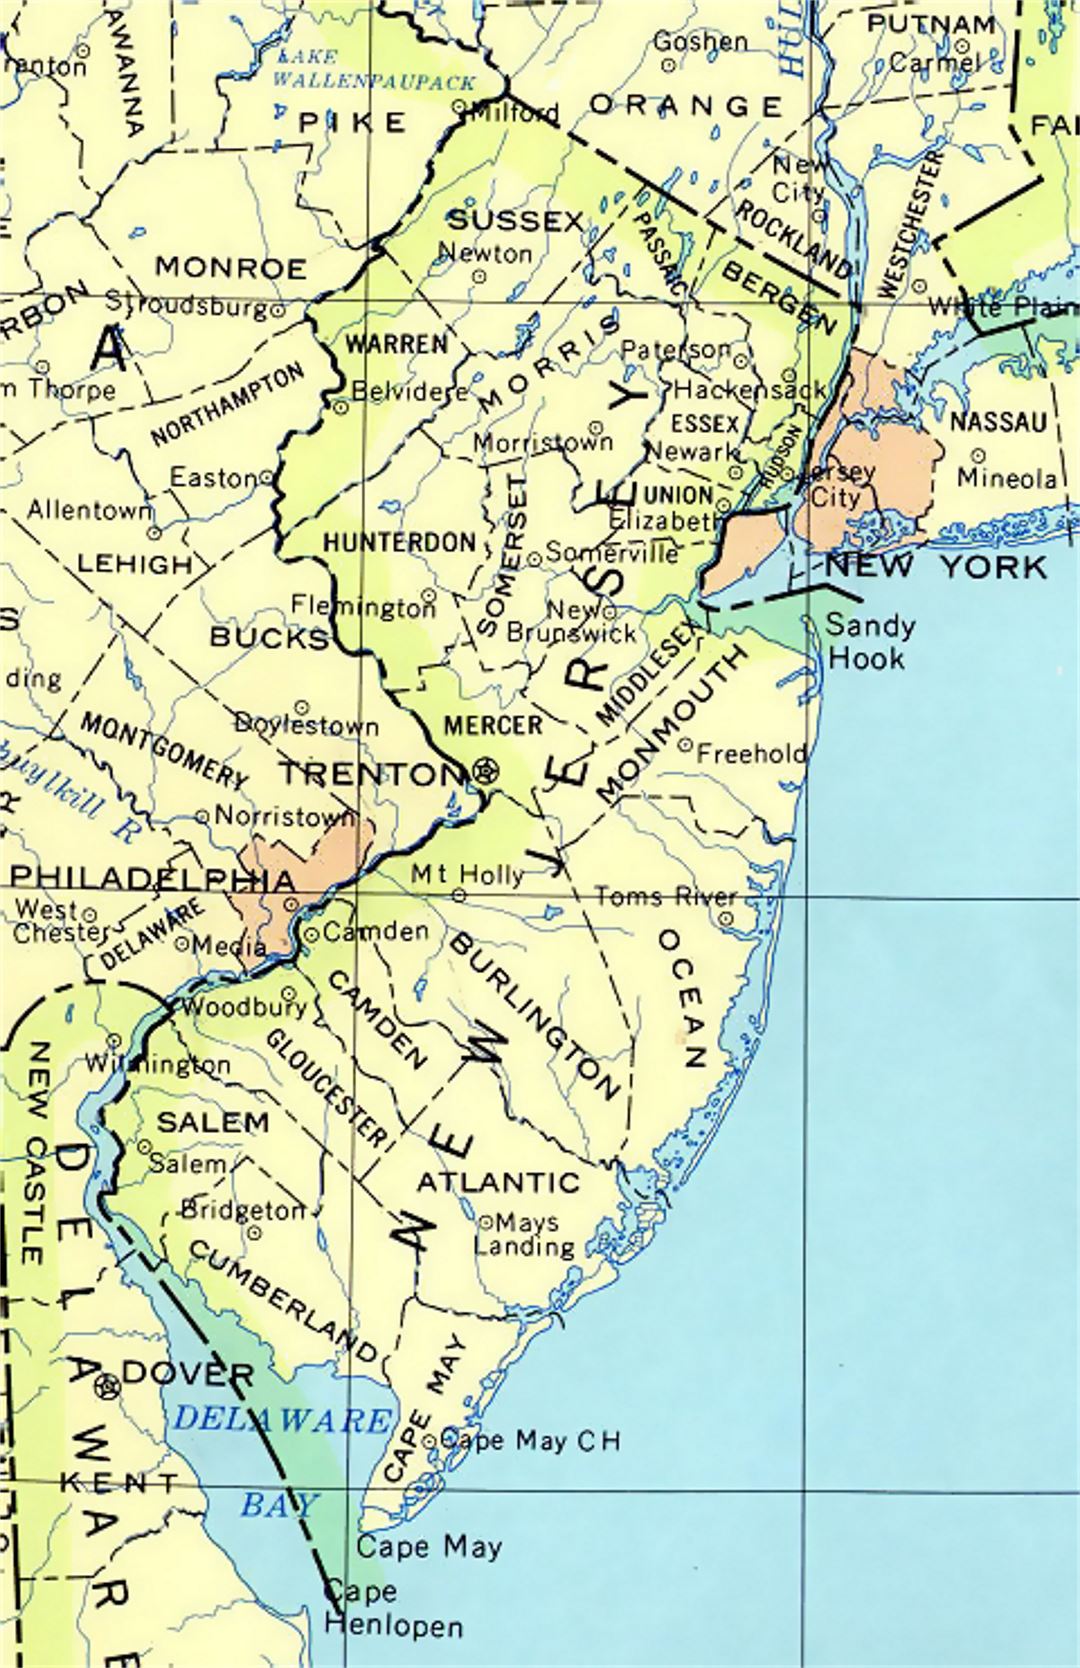 Administrative map of New Jersey state